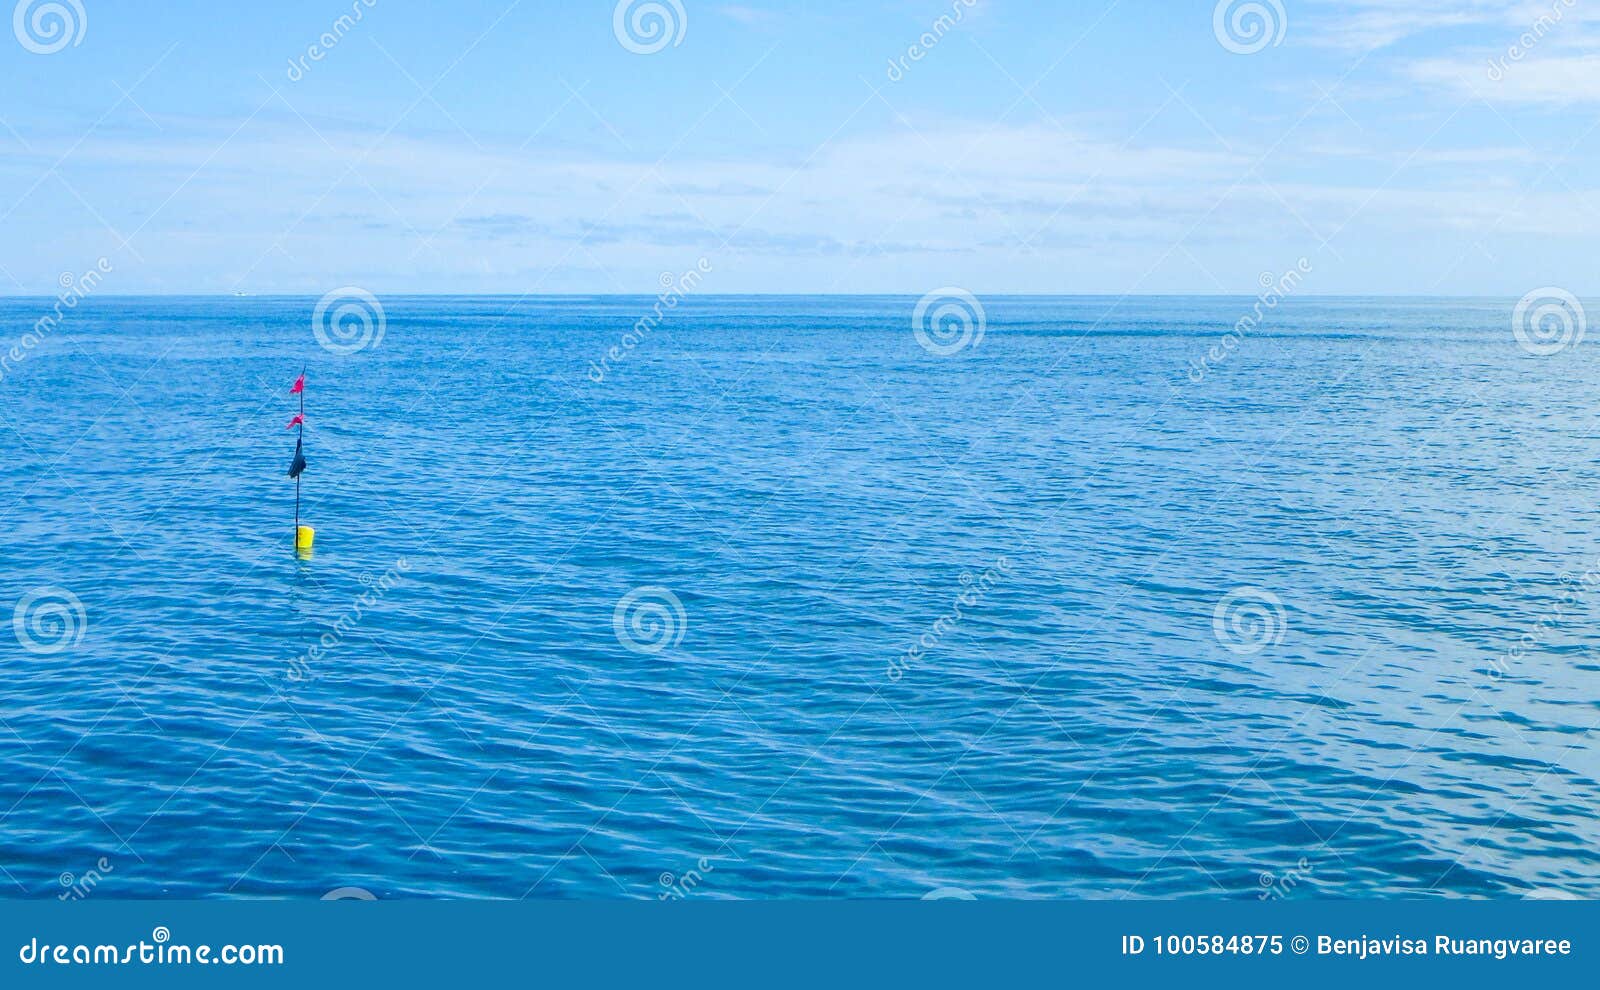 Buoy Flag Red Black Yellow Symbol in Sea Ocean Stock Image - Image of  maritime, blue: 100584875